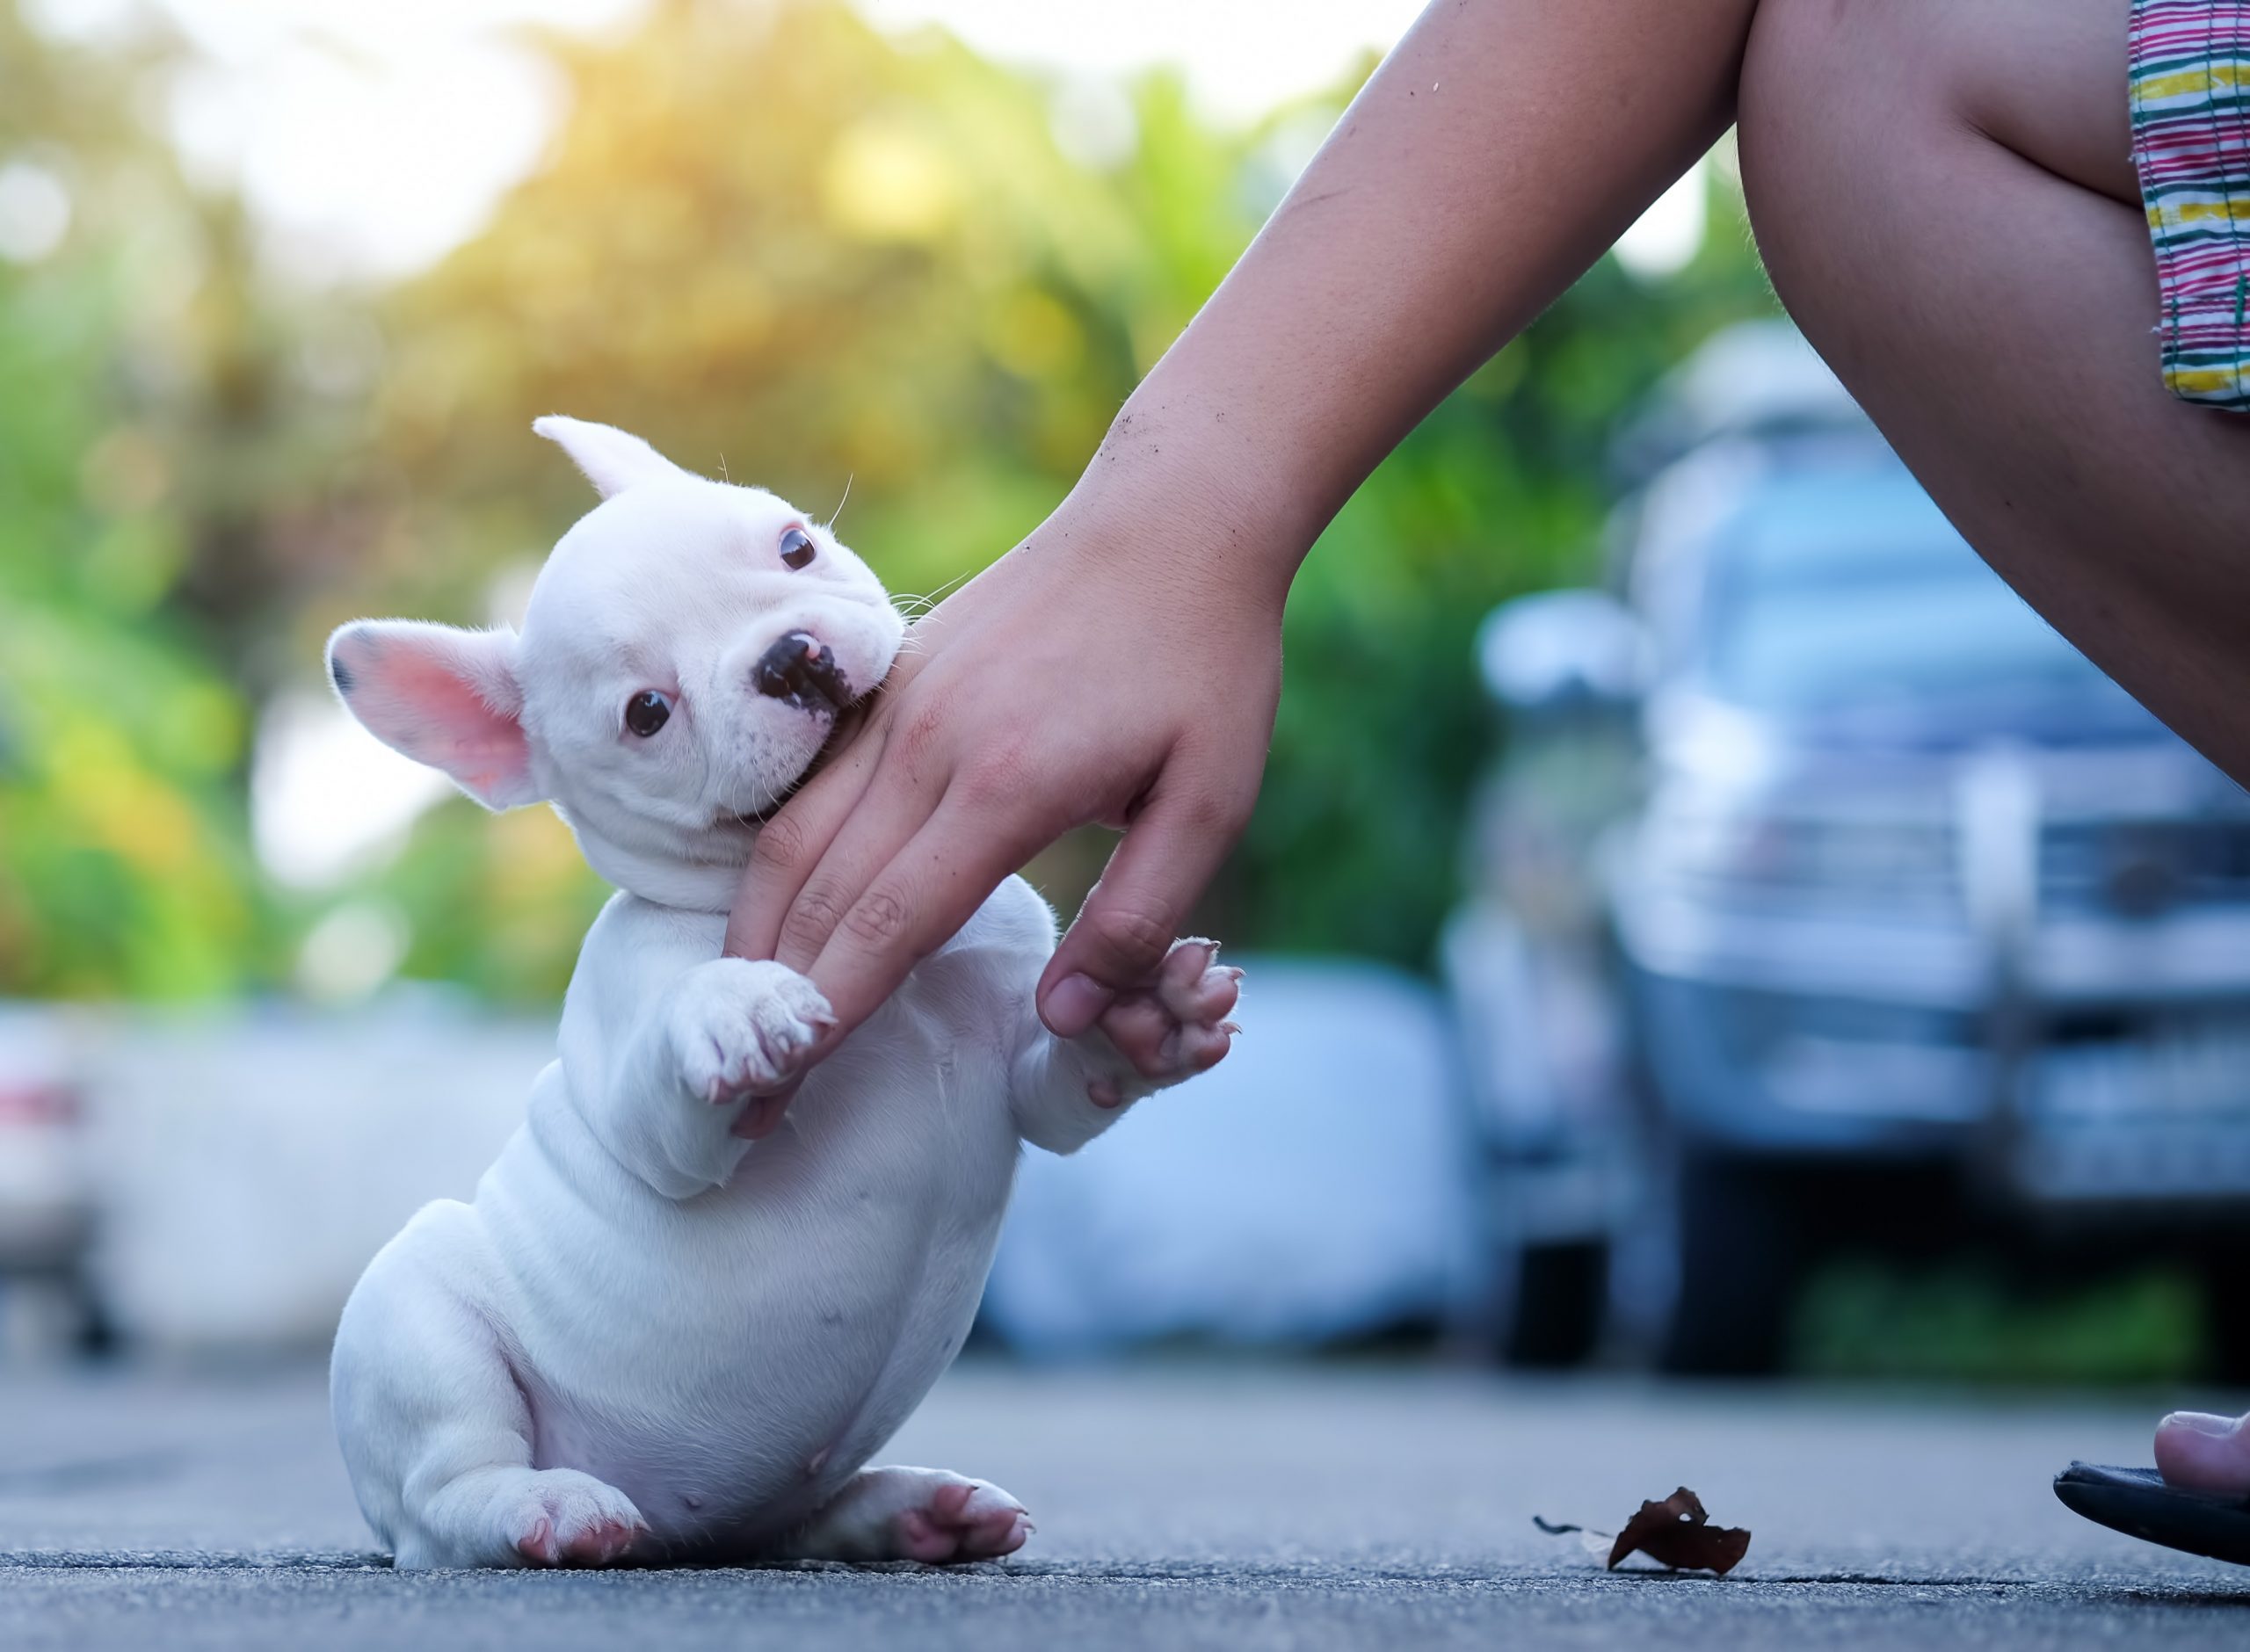 This Is the Secret Puppy Feeding Schedule No One Tells You About